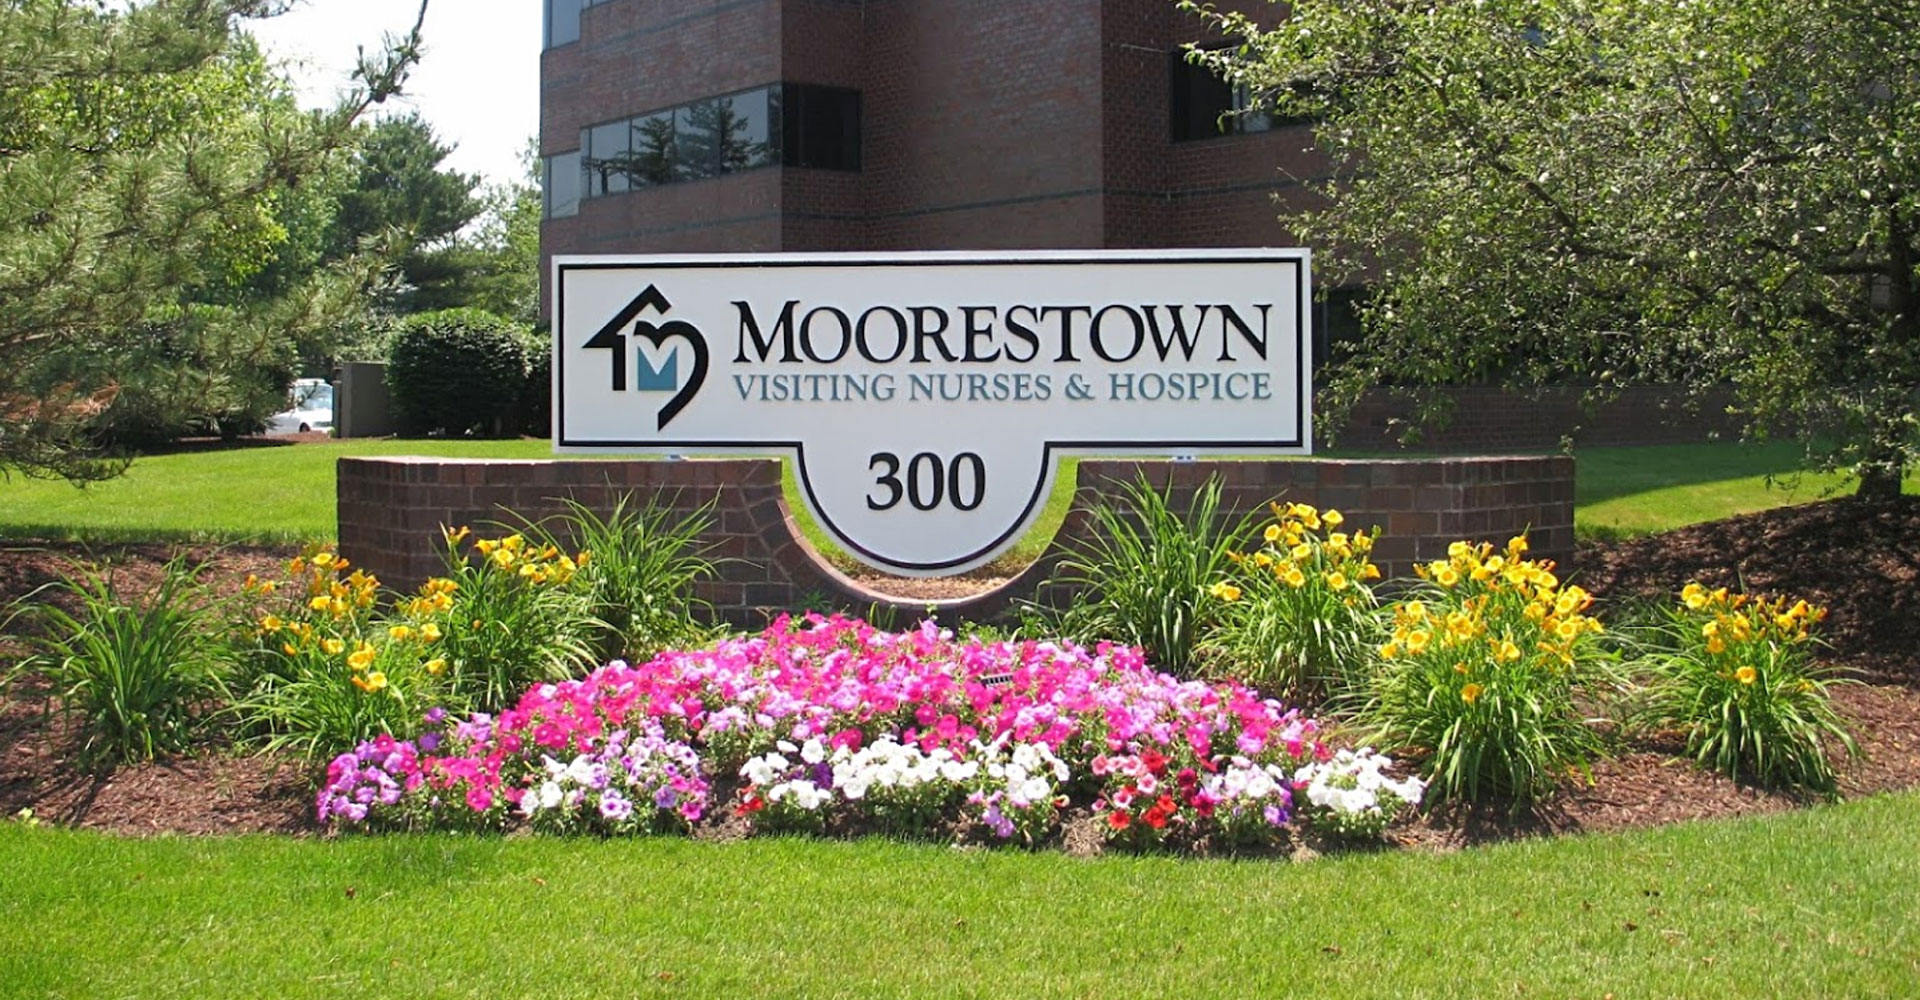 Main office sign